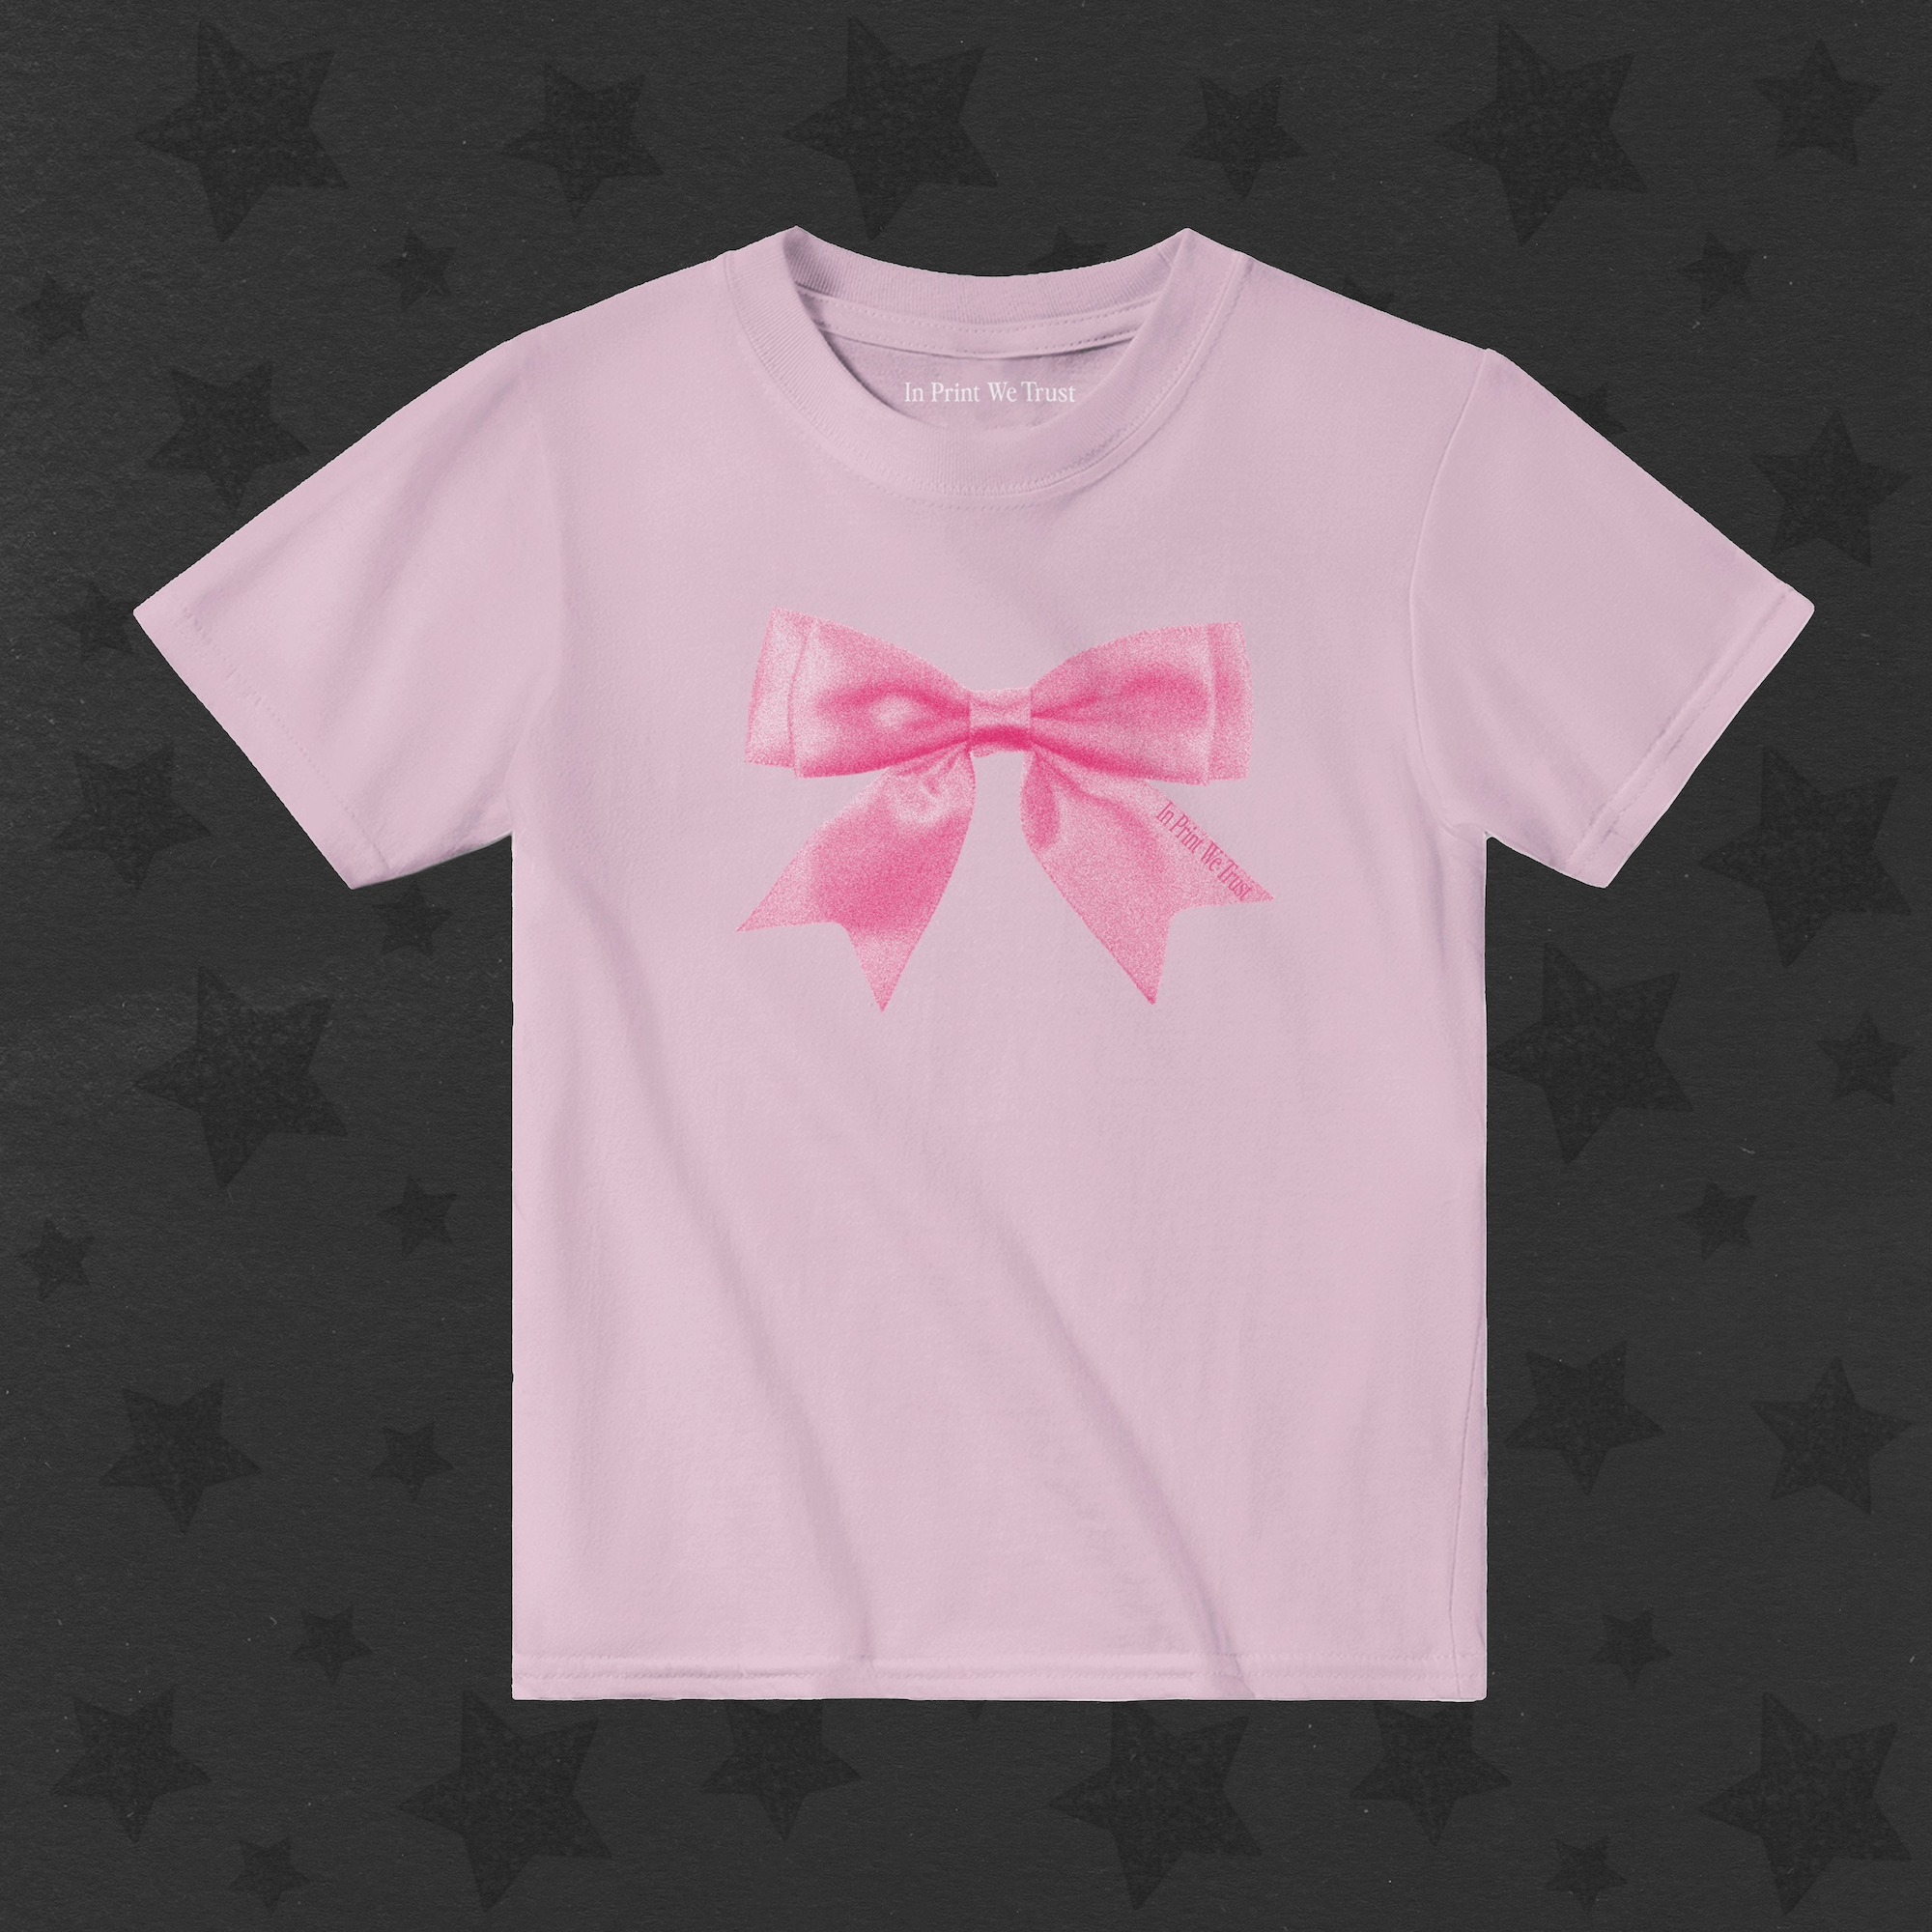 'Put a Bow On It' premium baby tee - In Print We Trust